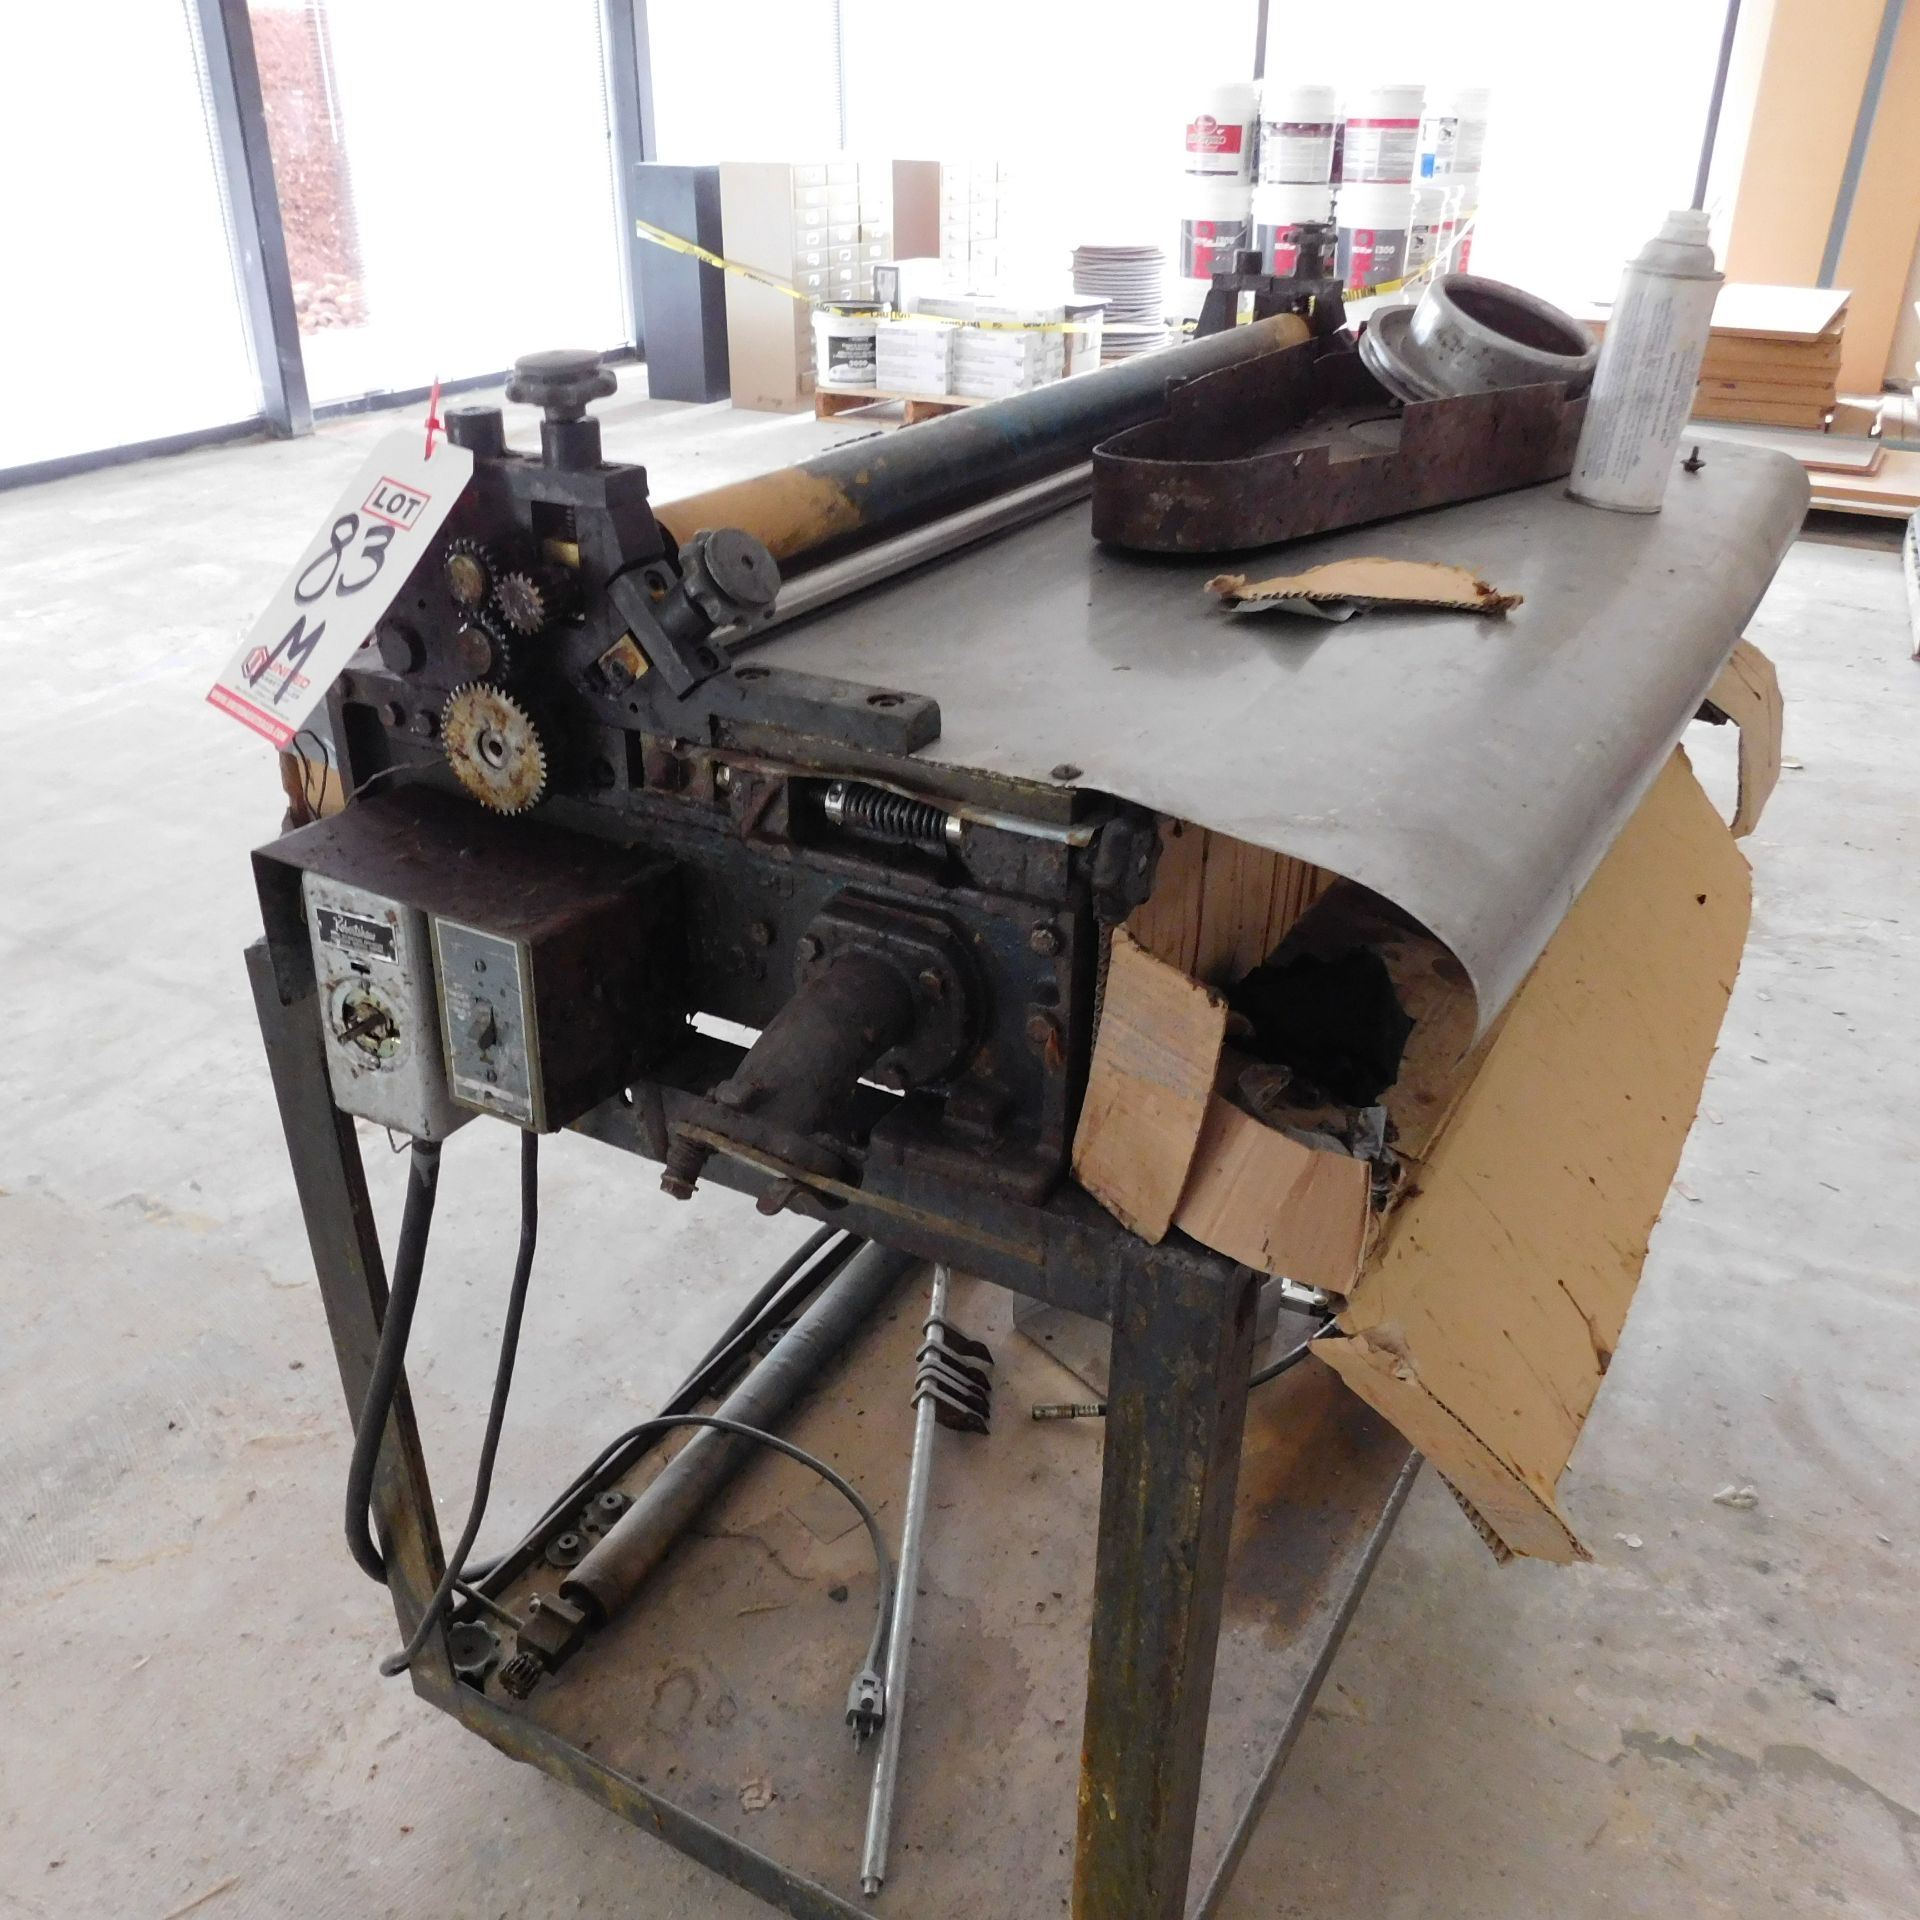 36" GLUE APPLICATION MACHINE, NEEDS WORK OR FOR PARTS - Image 3 of 3